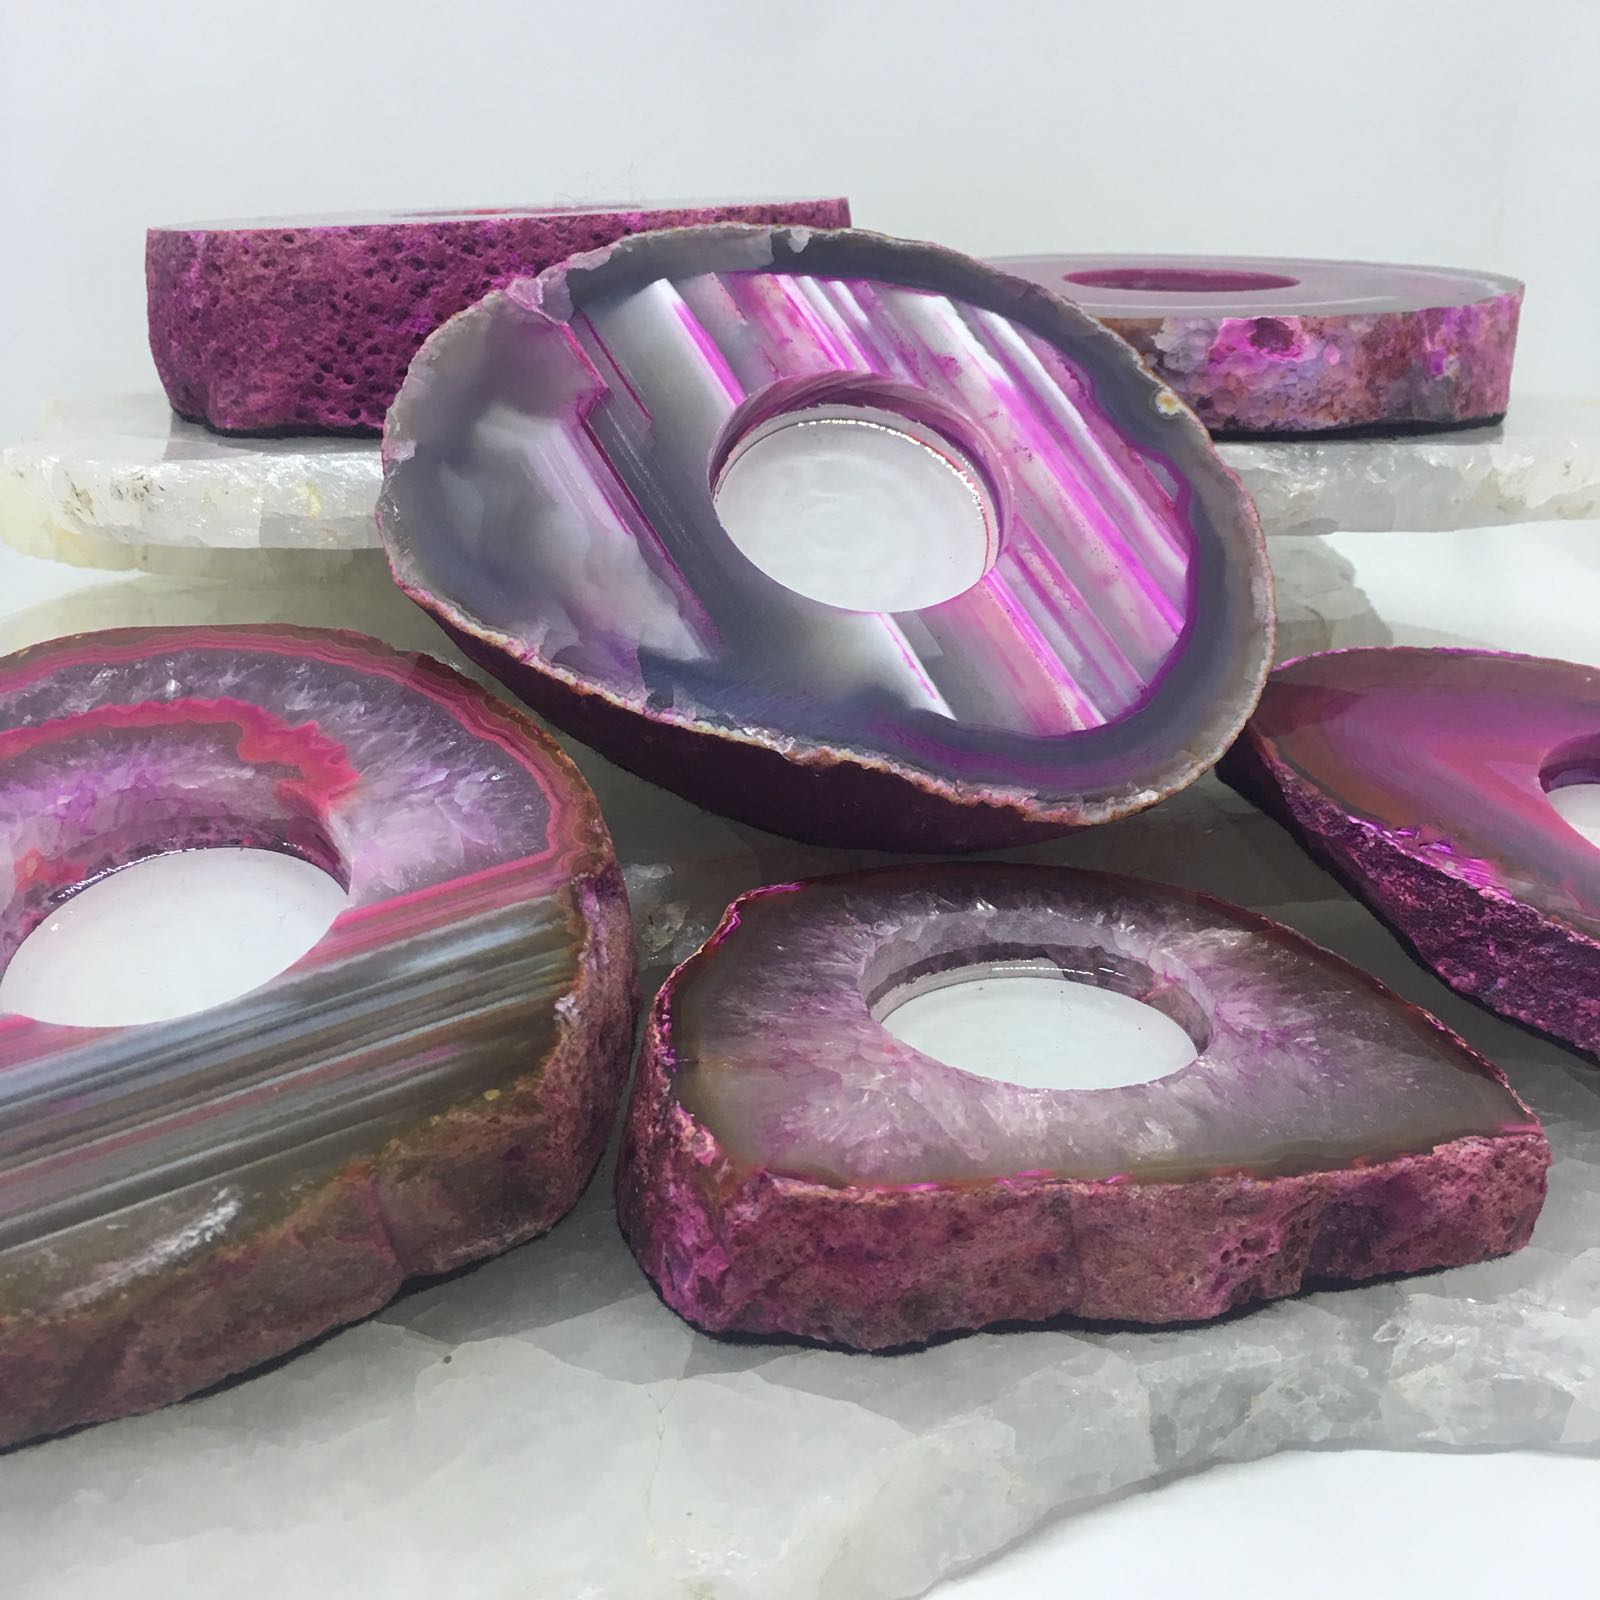 Stones from Uruguay - Pink Dyed  Agate Slice Candle Holder,  Pink Agate Slab Candle Holder, Pink Agate Tea light Candle Holder